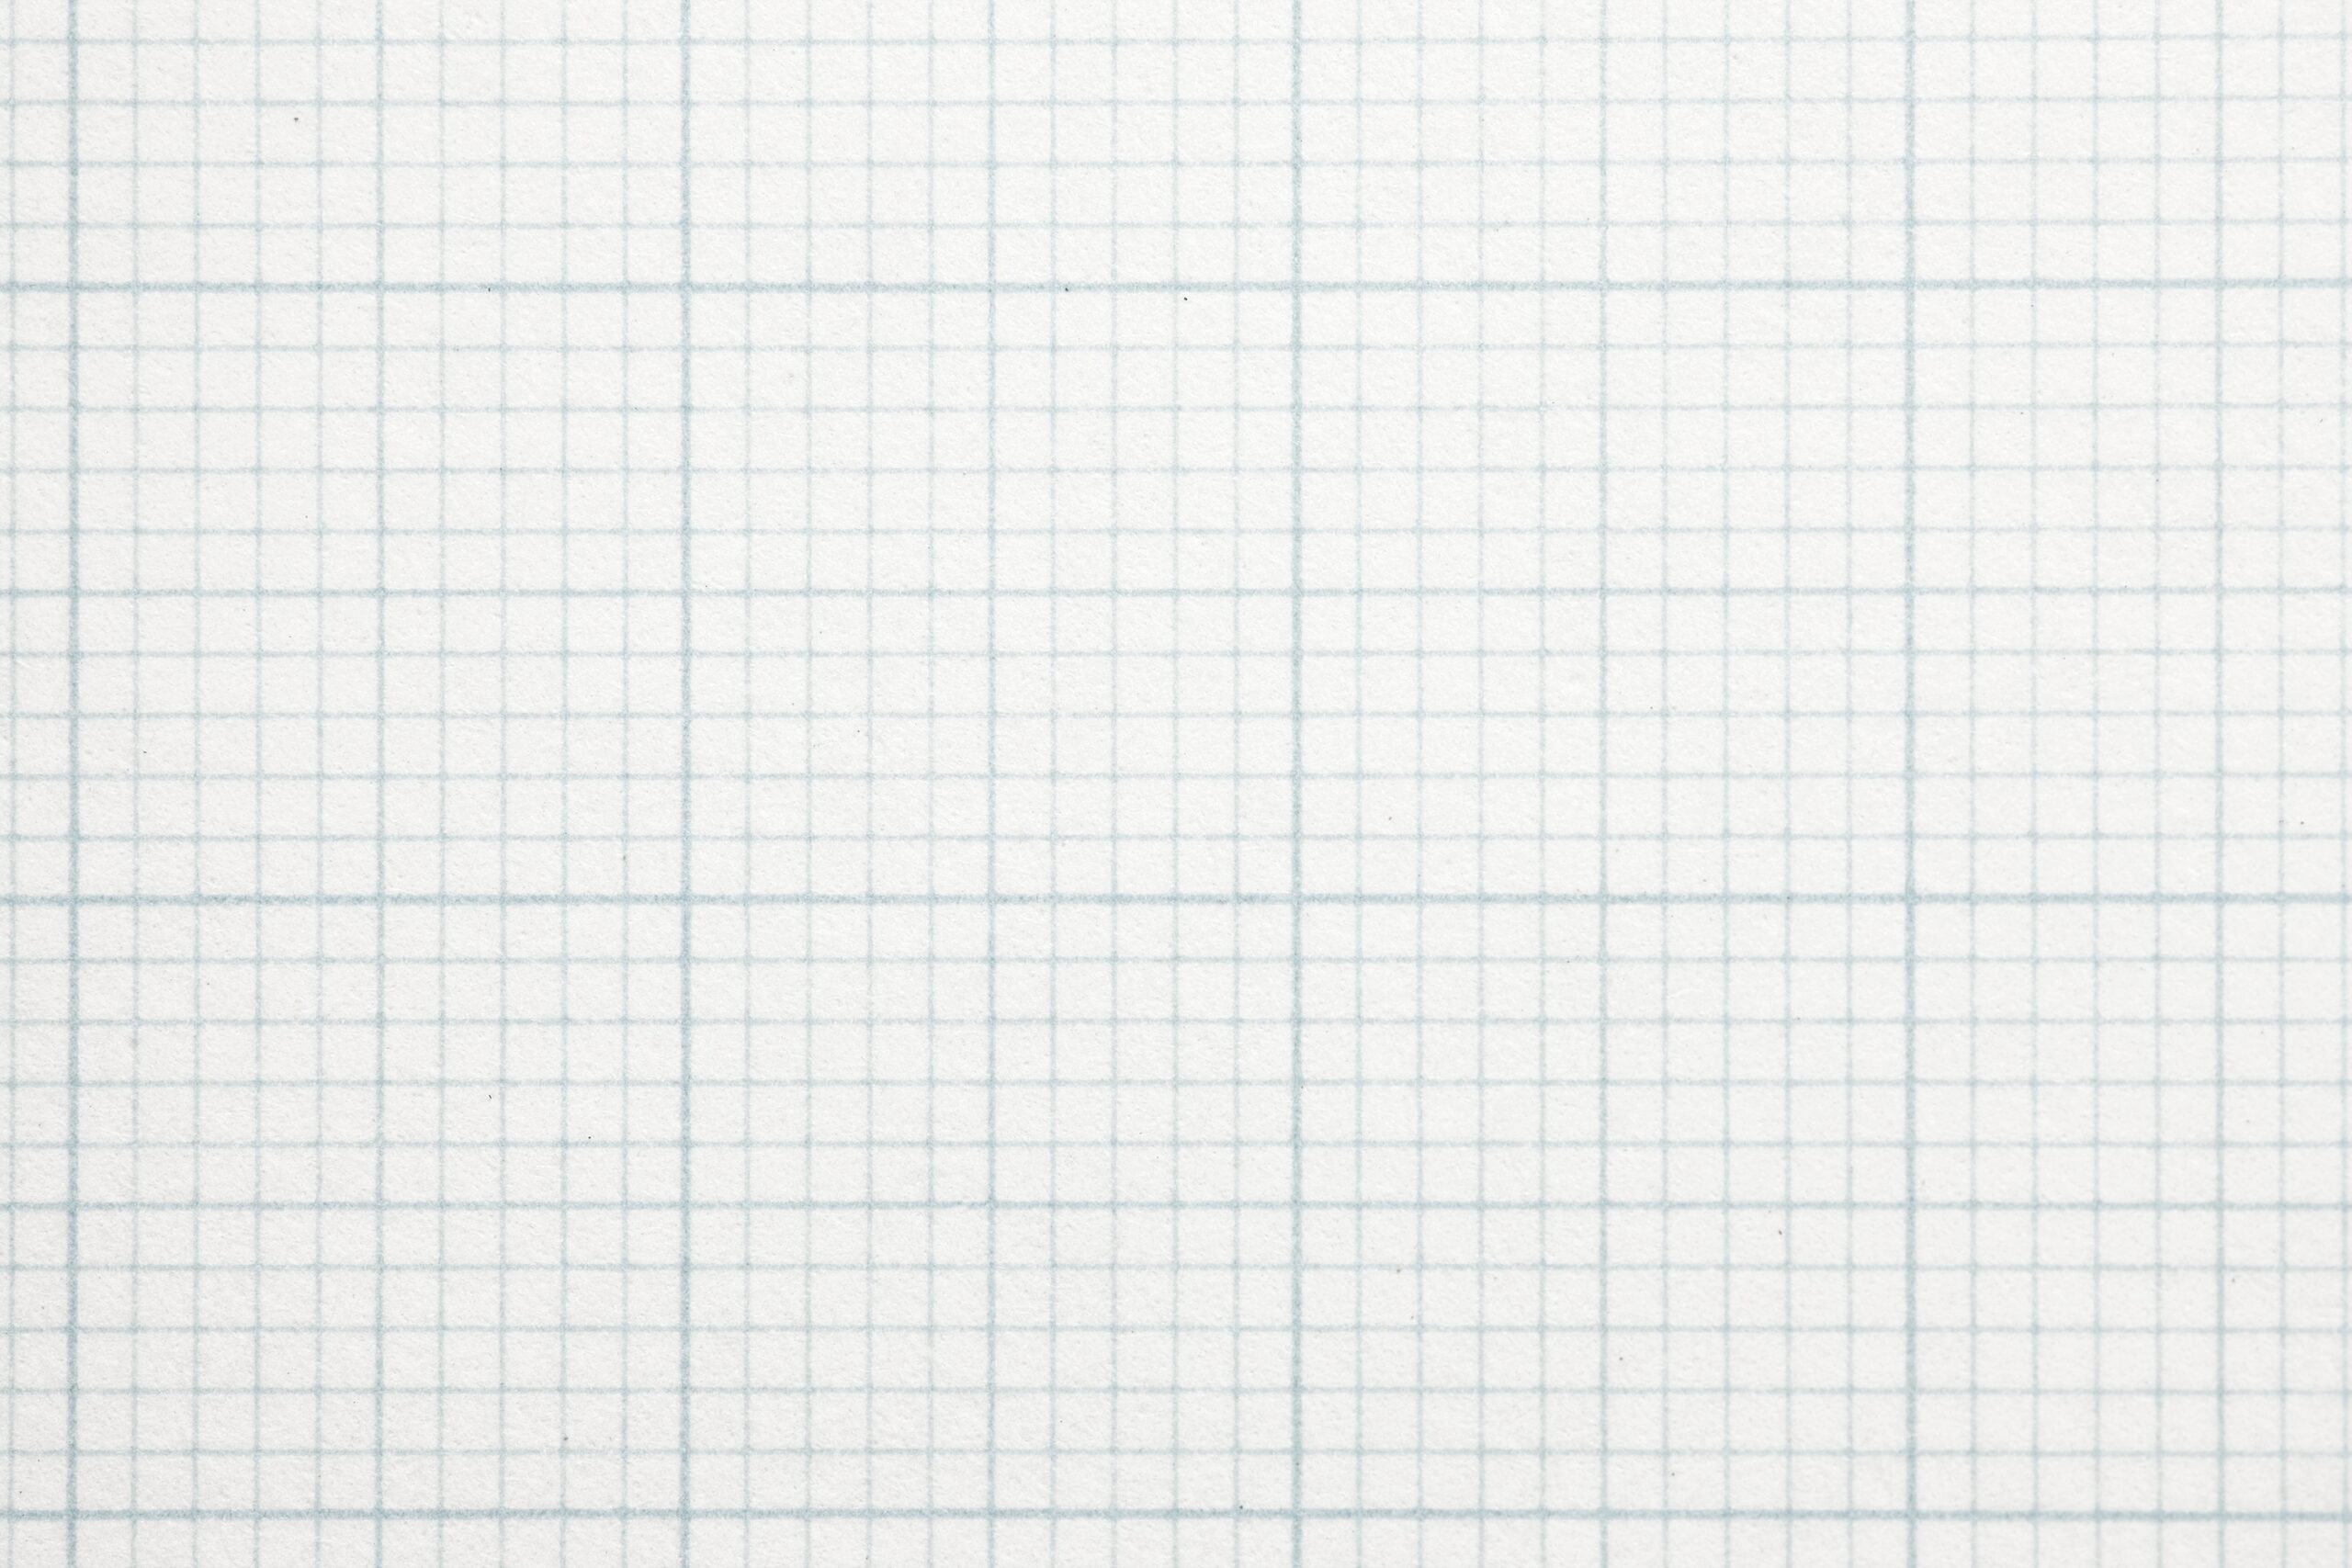 High magnification graph grid scale paper. Shot perfectly square